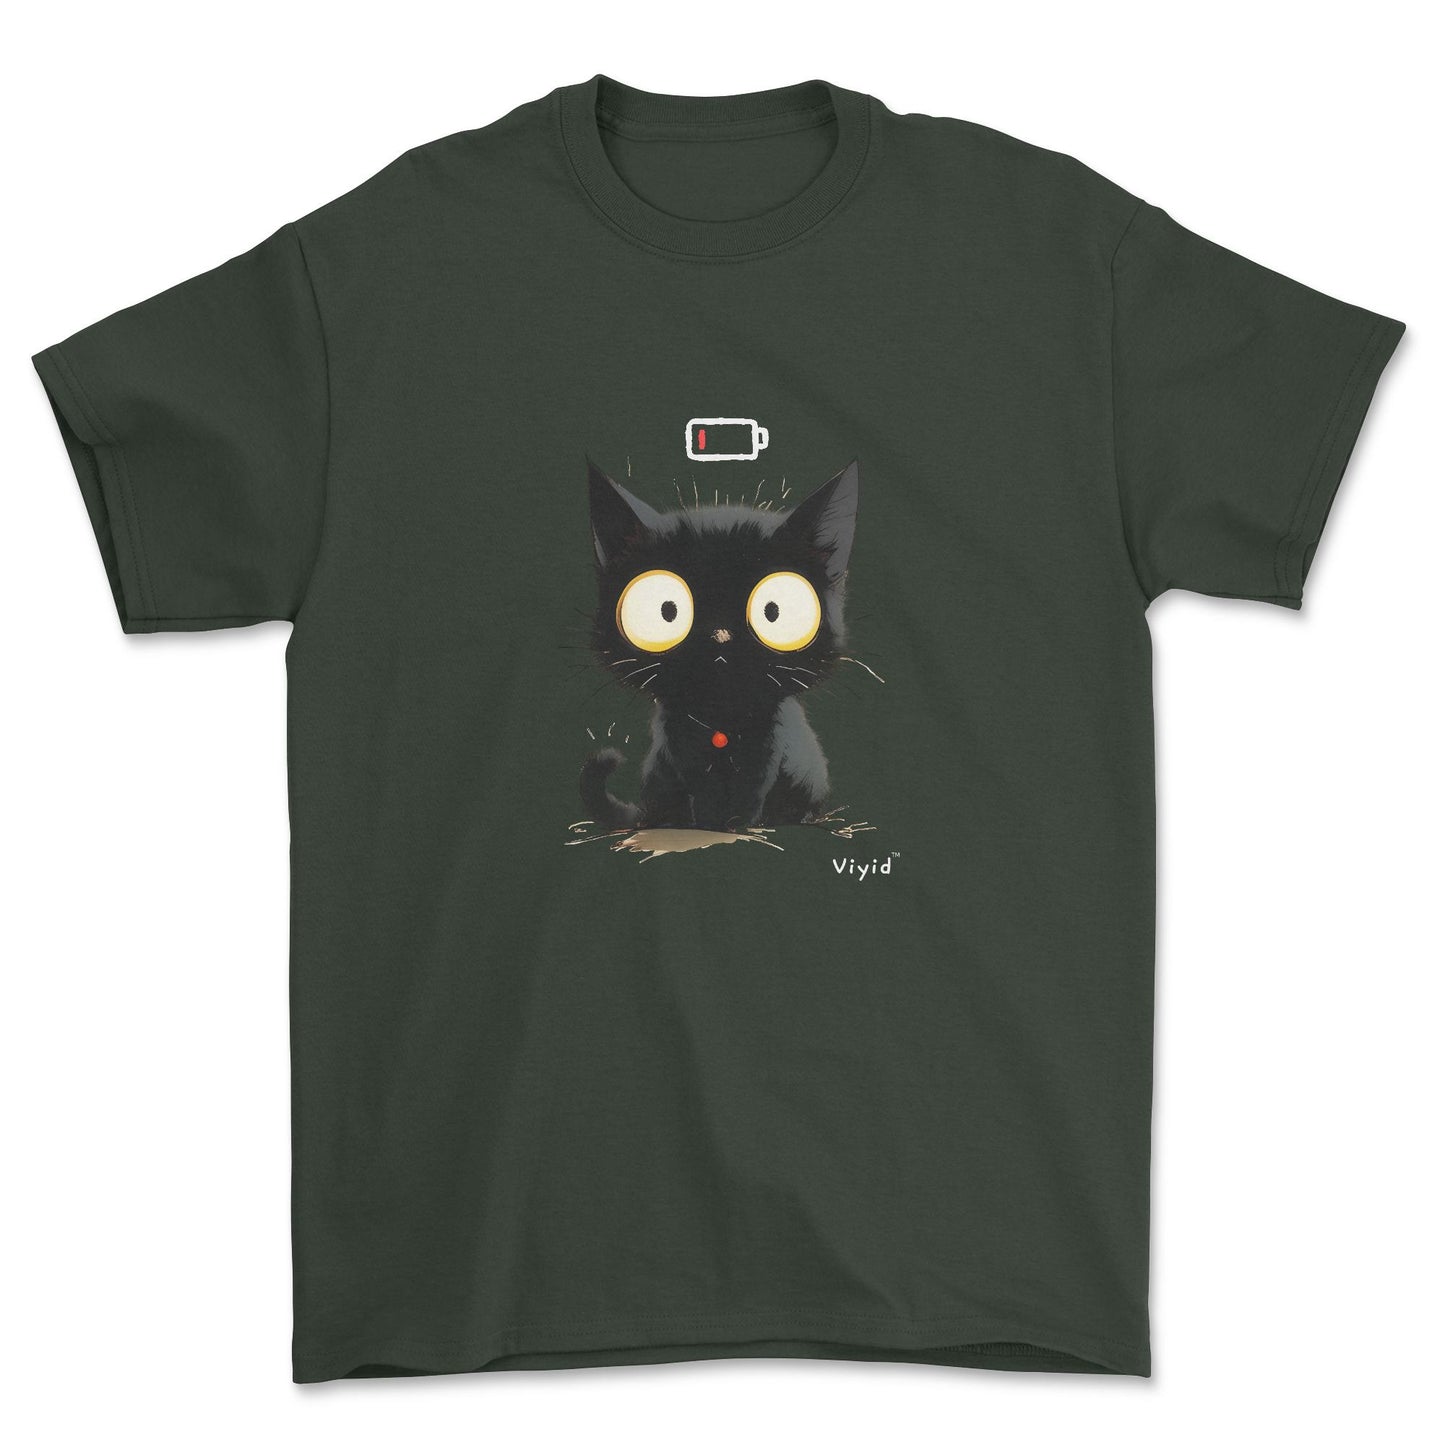 Low battery black cat youth t-shirt forest green